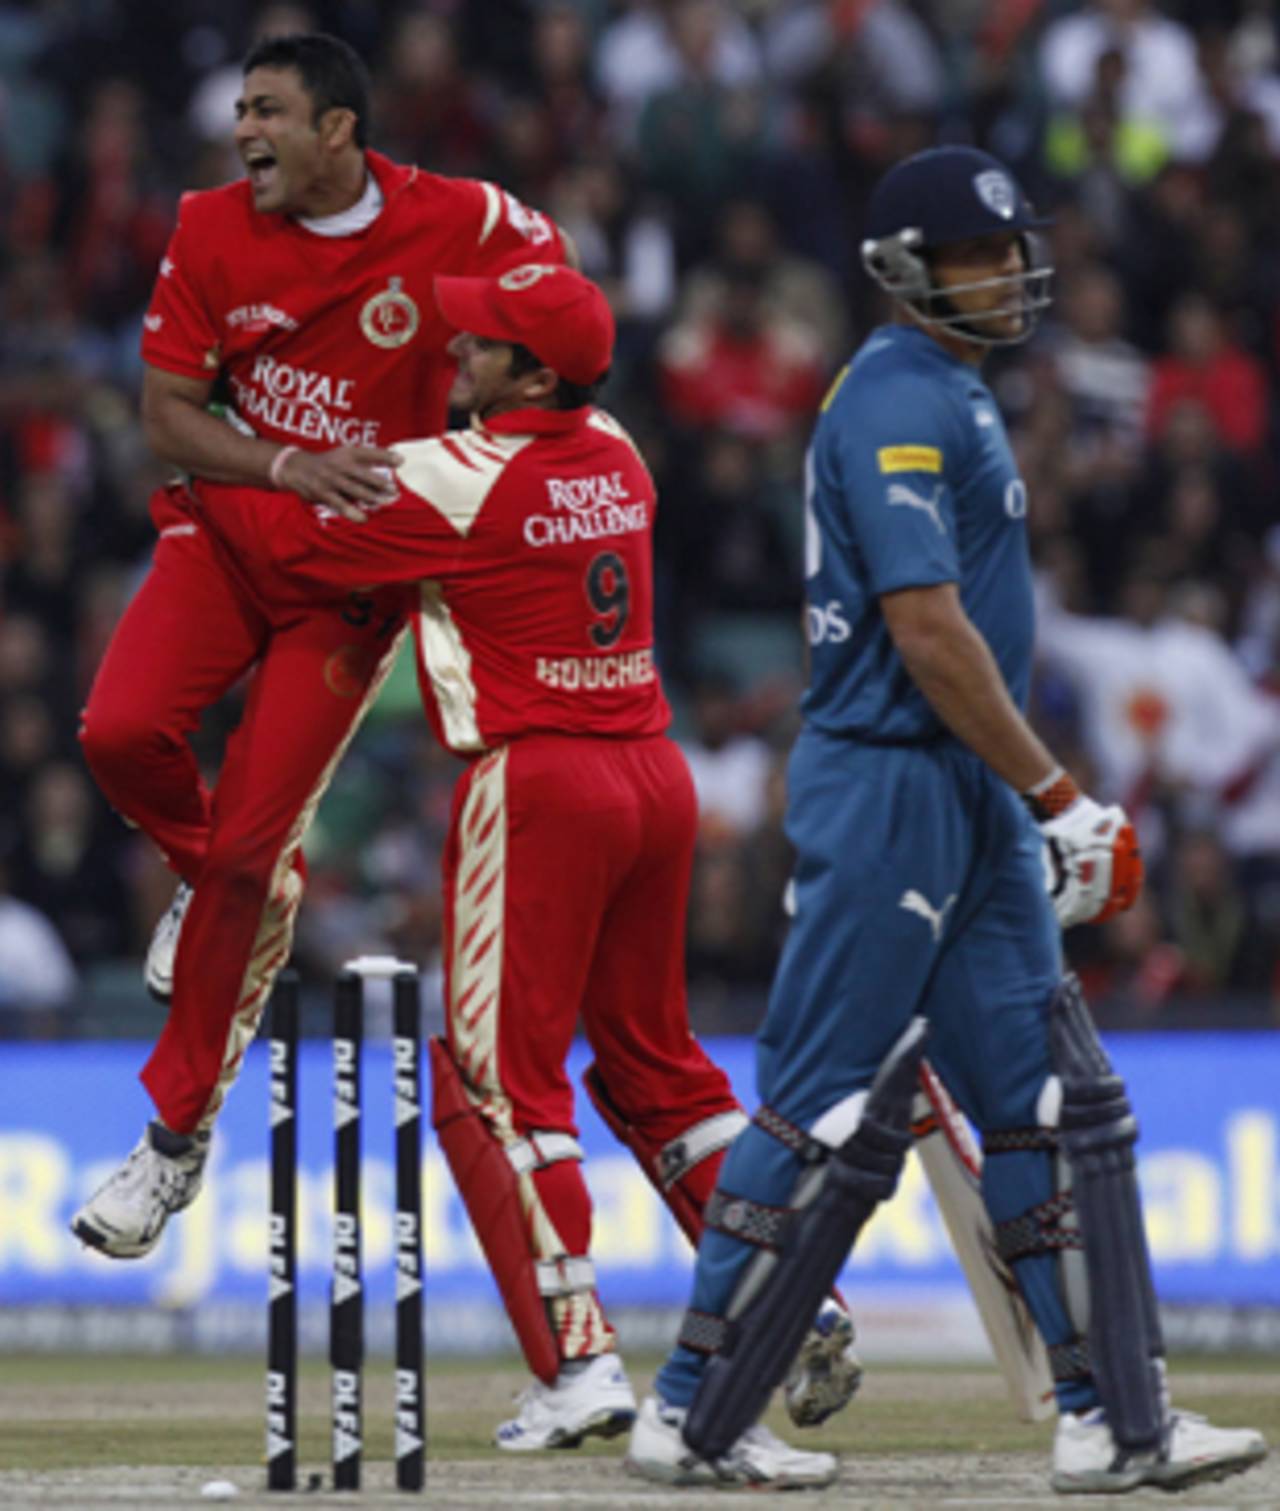 Anil Kumble sends back Andrew Symonds, Royal Challengers Bangalore v Deccan Chargers, IPL, final, Johannesburg, May 24, 2009